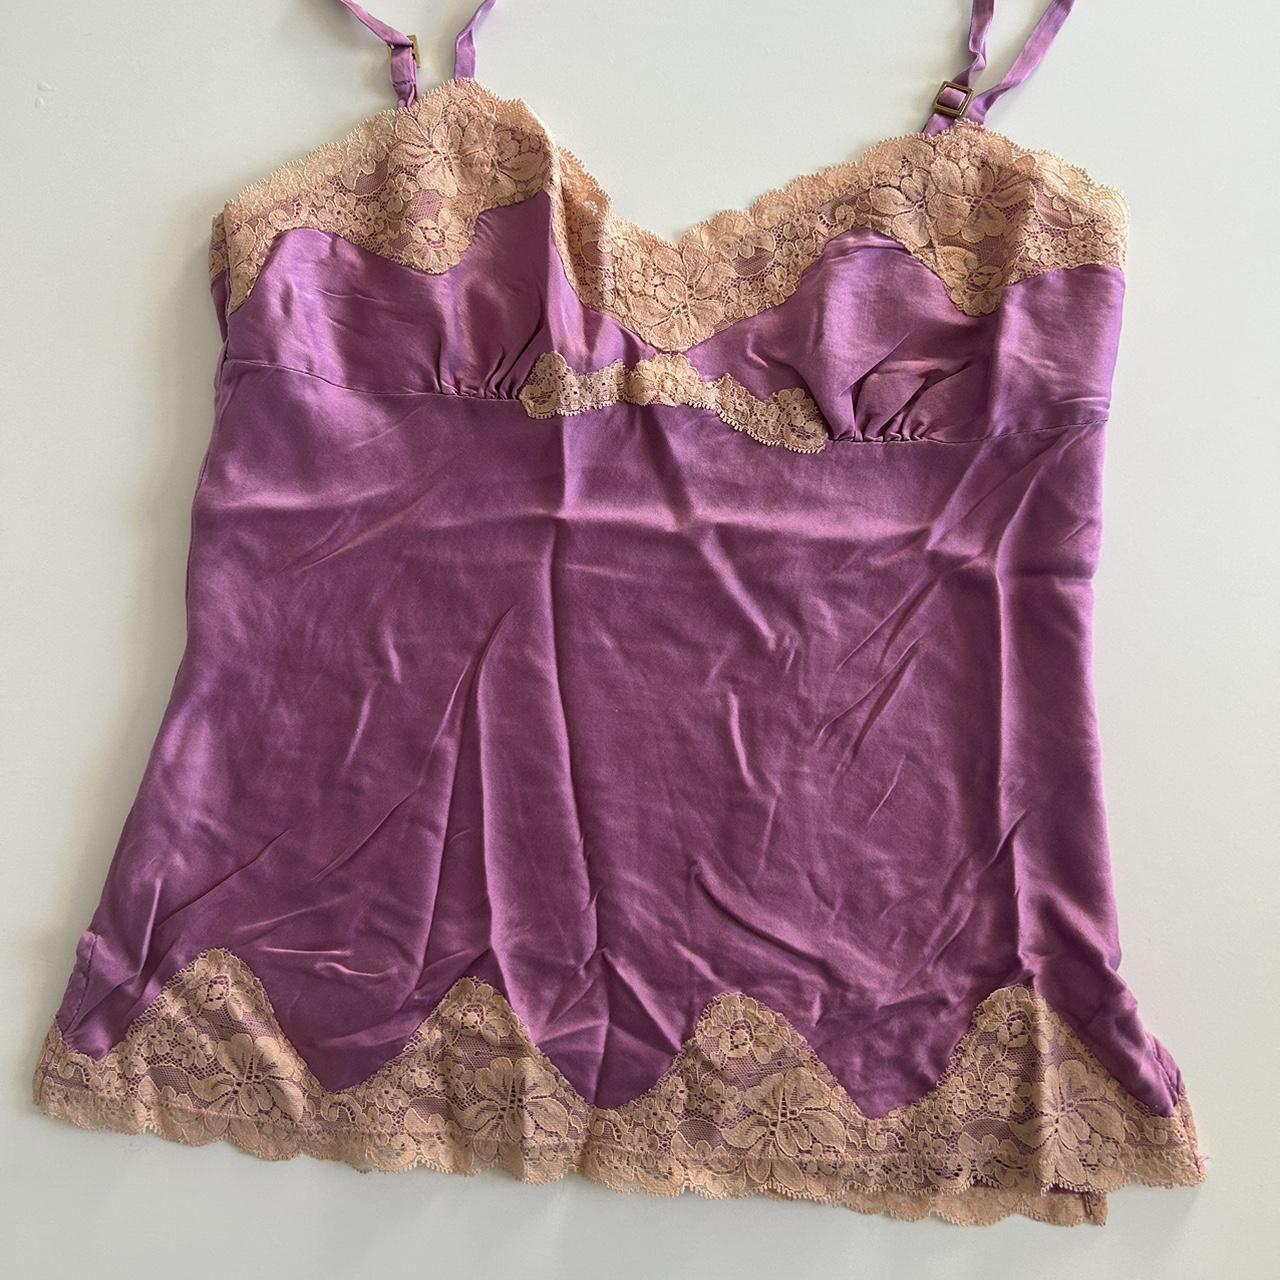 lace and satin cami - Depop